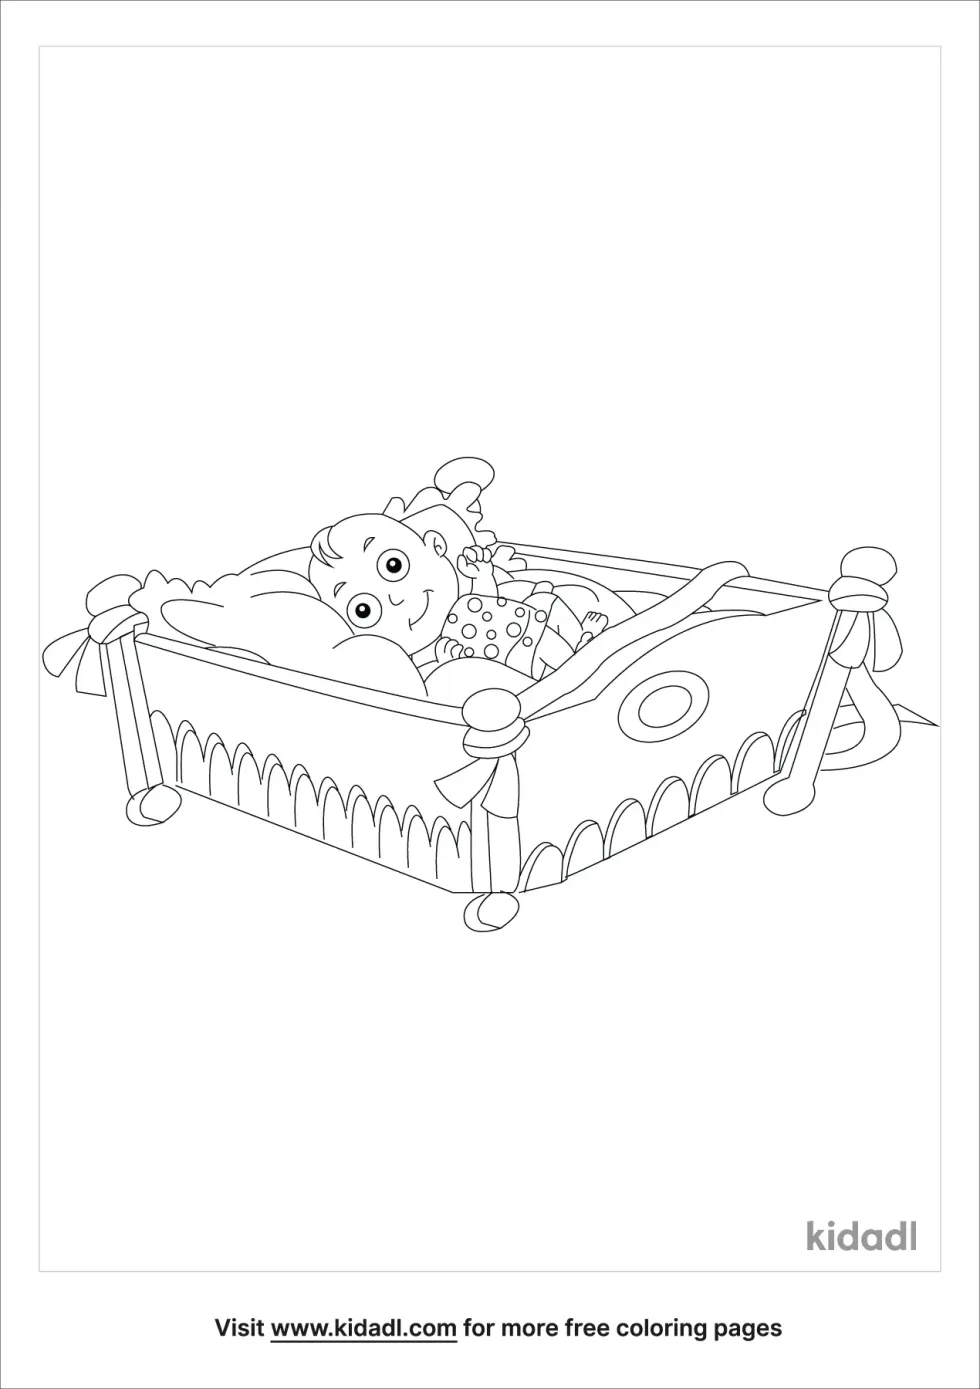 Rock A Bye Baby Coloring Page